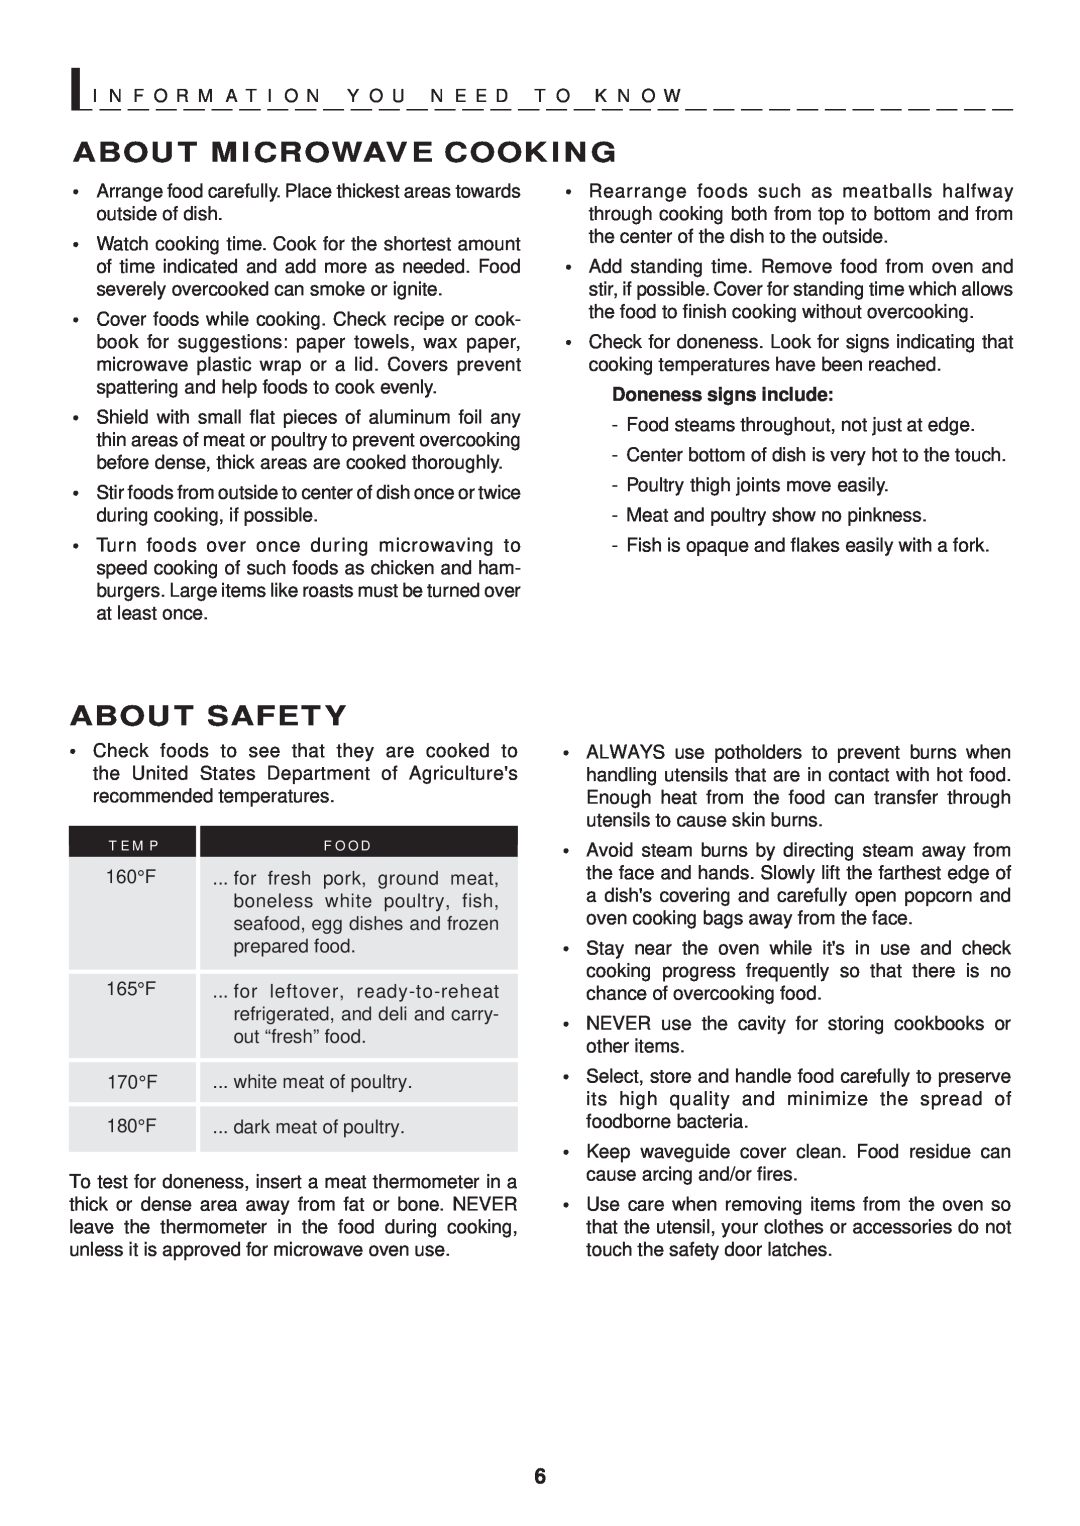 Sharp R-402FW About Microwave Cooking, About Safety, T E M P, F O O D, I N F O R M A T I O N Y O U N E E D T O K N O W 